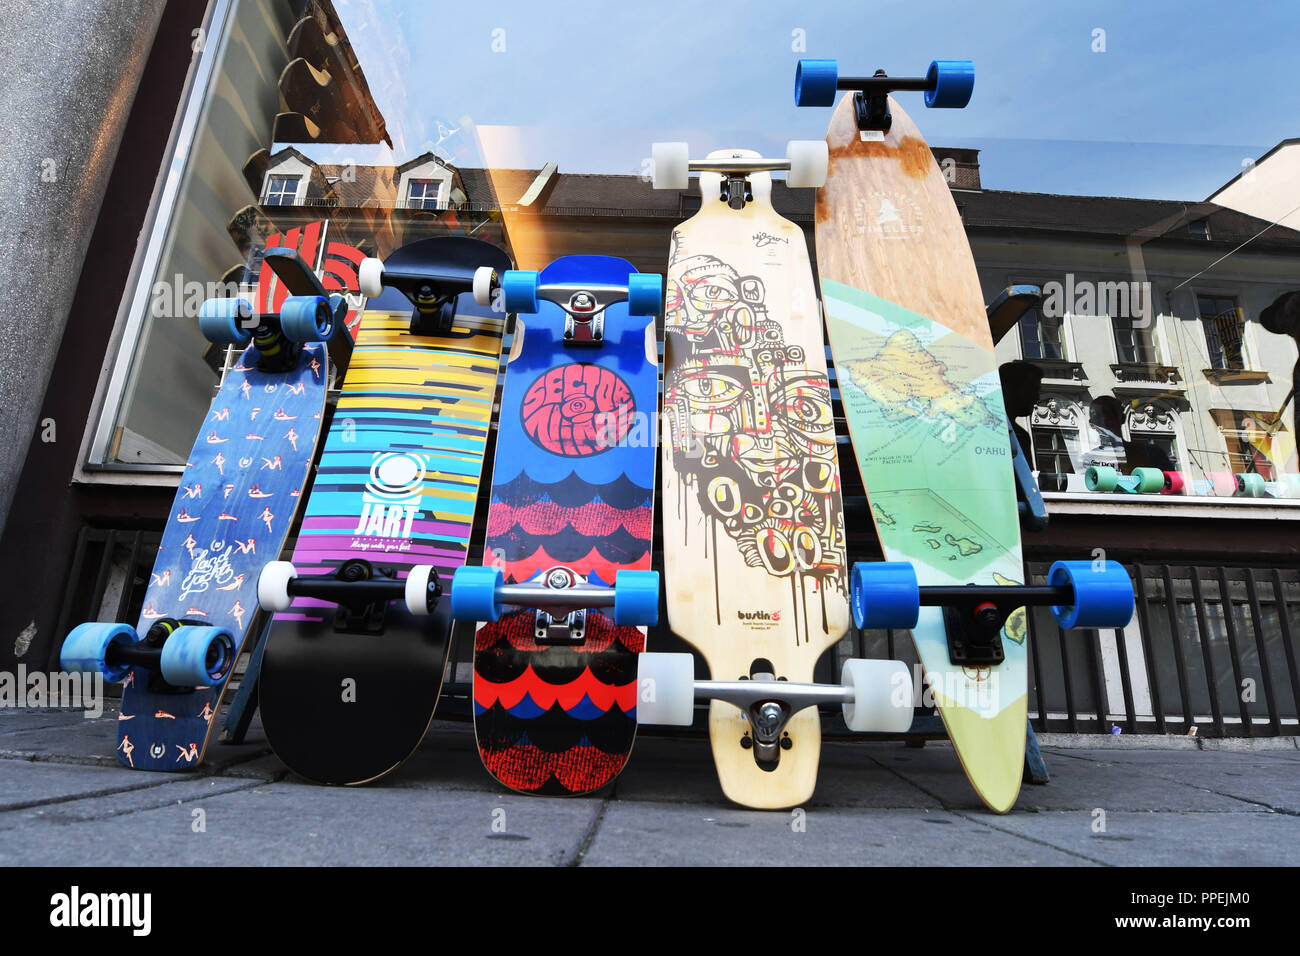 Skateshop High Resolution Stock Photography and Images - Alamy